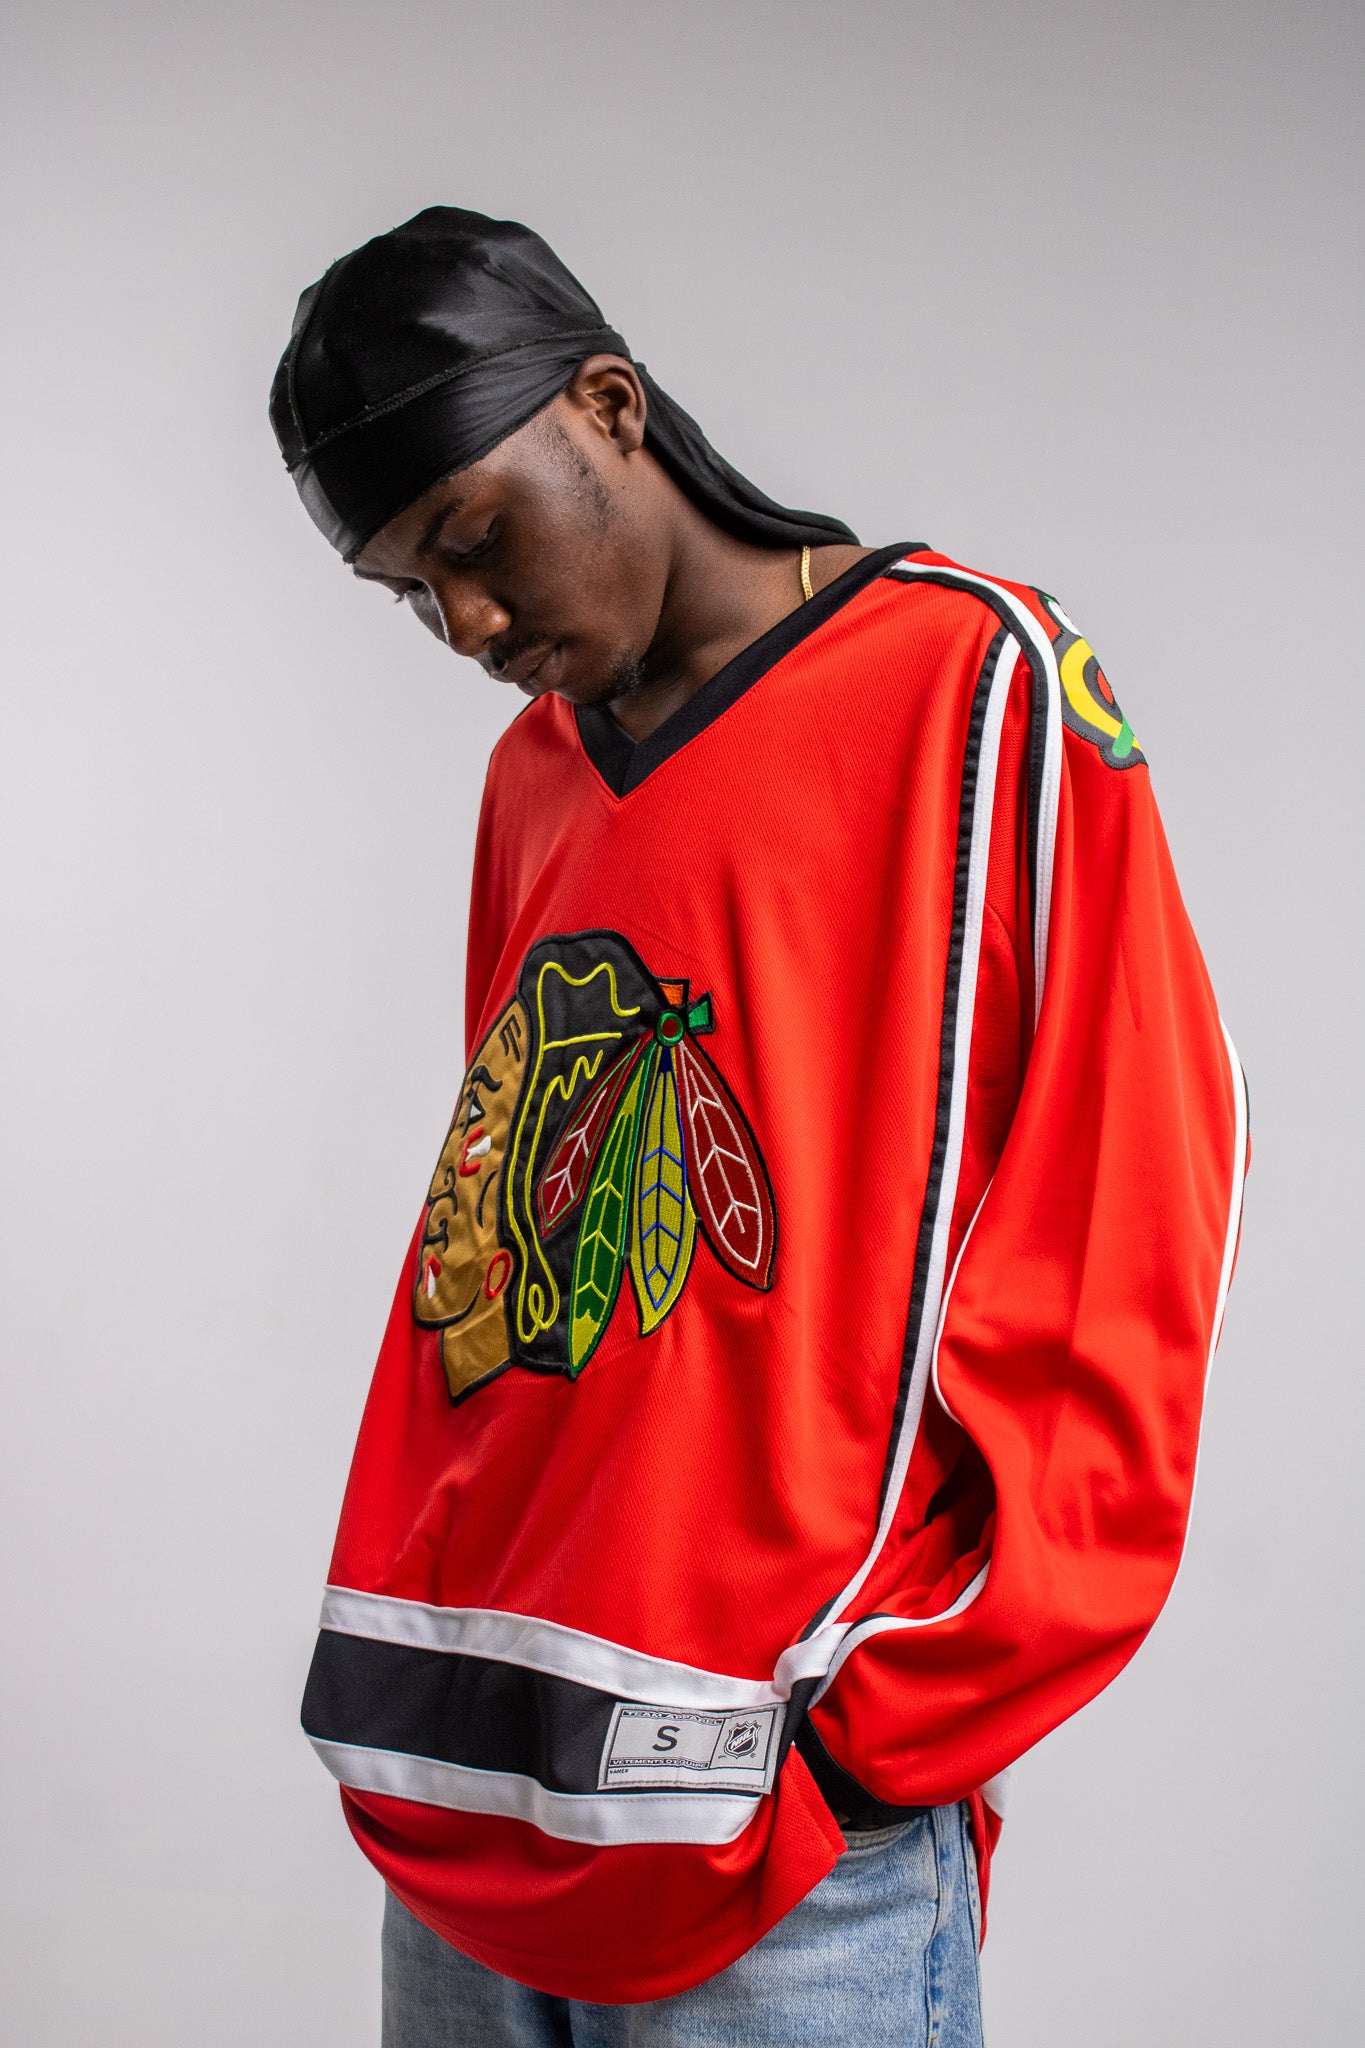 NHL Chicago Blackhawks Home Red Jersey Youth